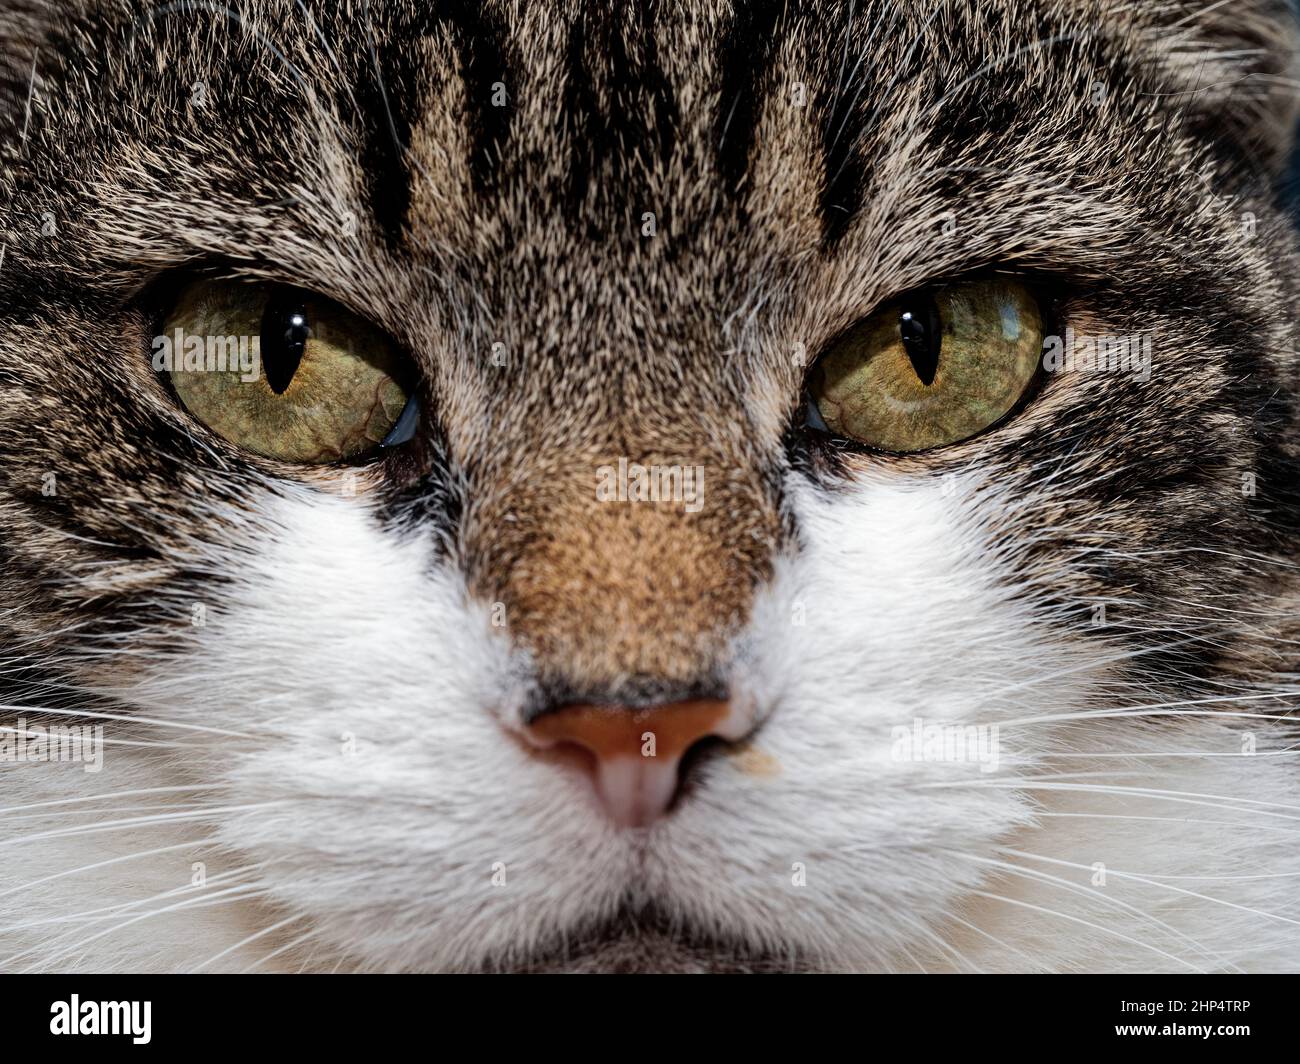 Close-up image of the eyes of a tabby and white domestic cat glaring at its owner (otherwise known as tame human or staff!) Stock Photo